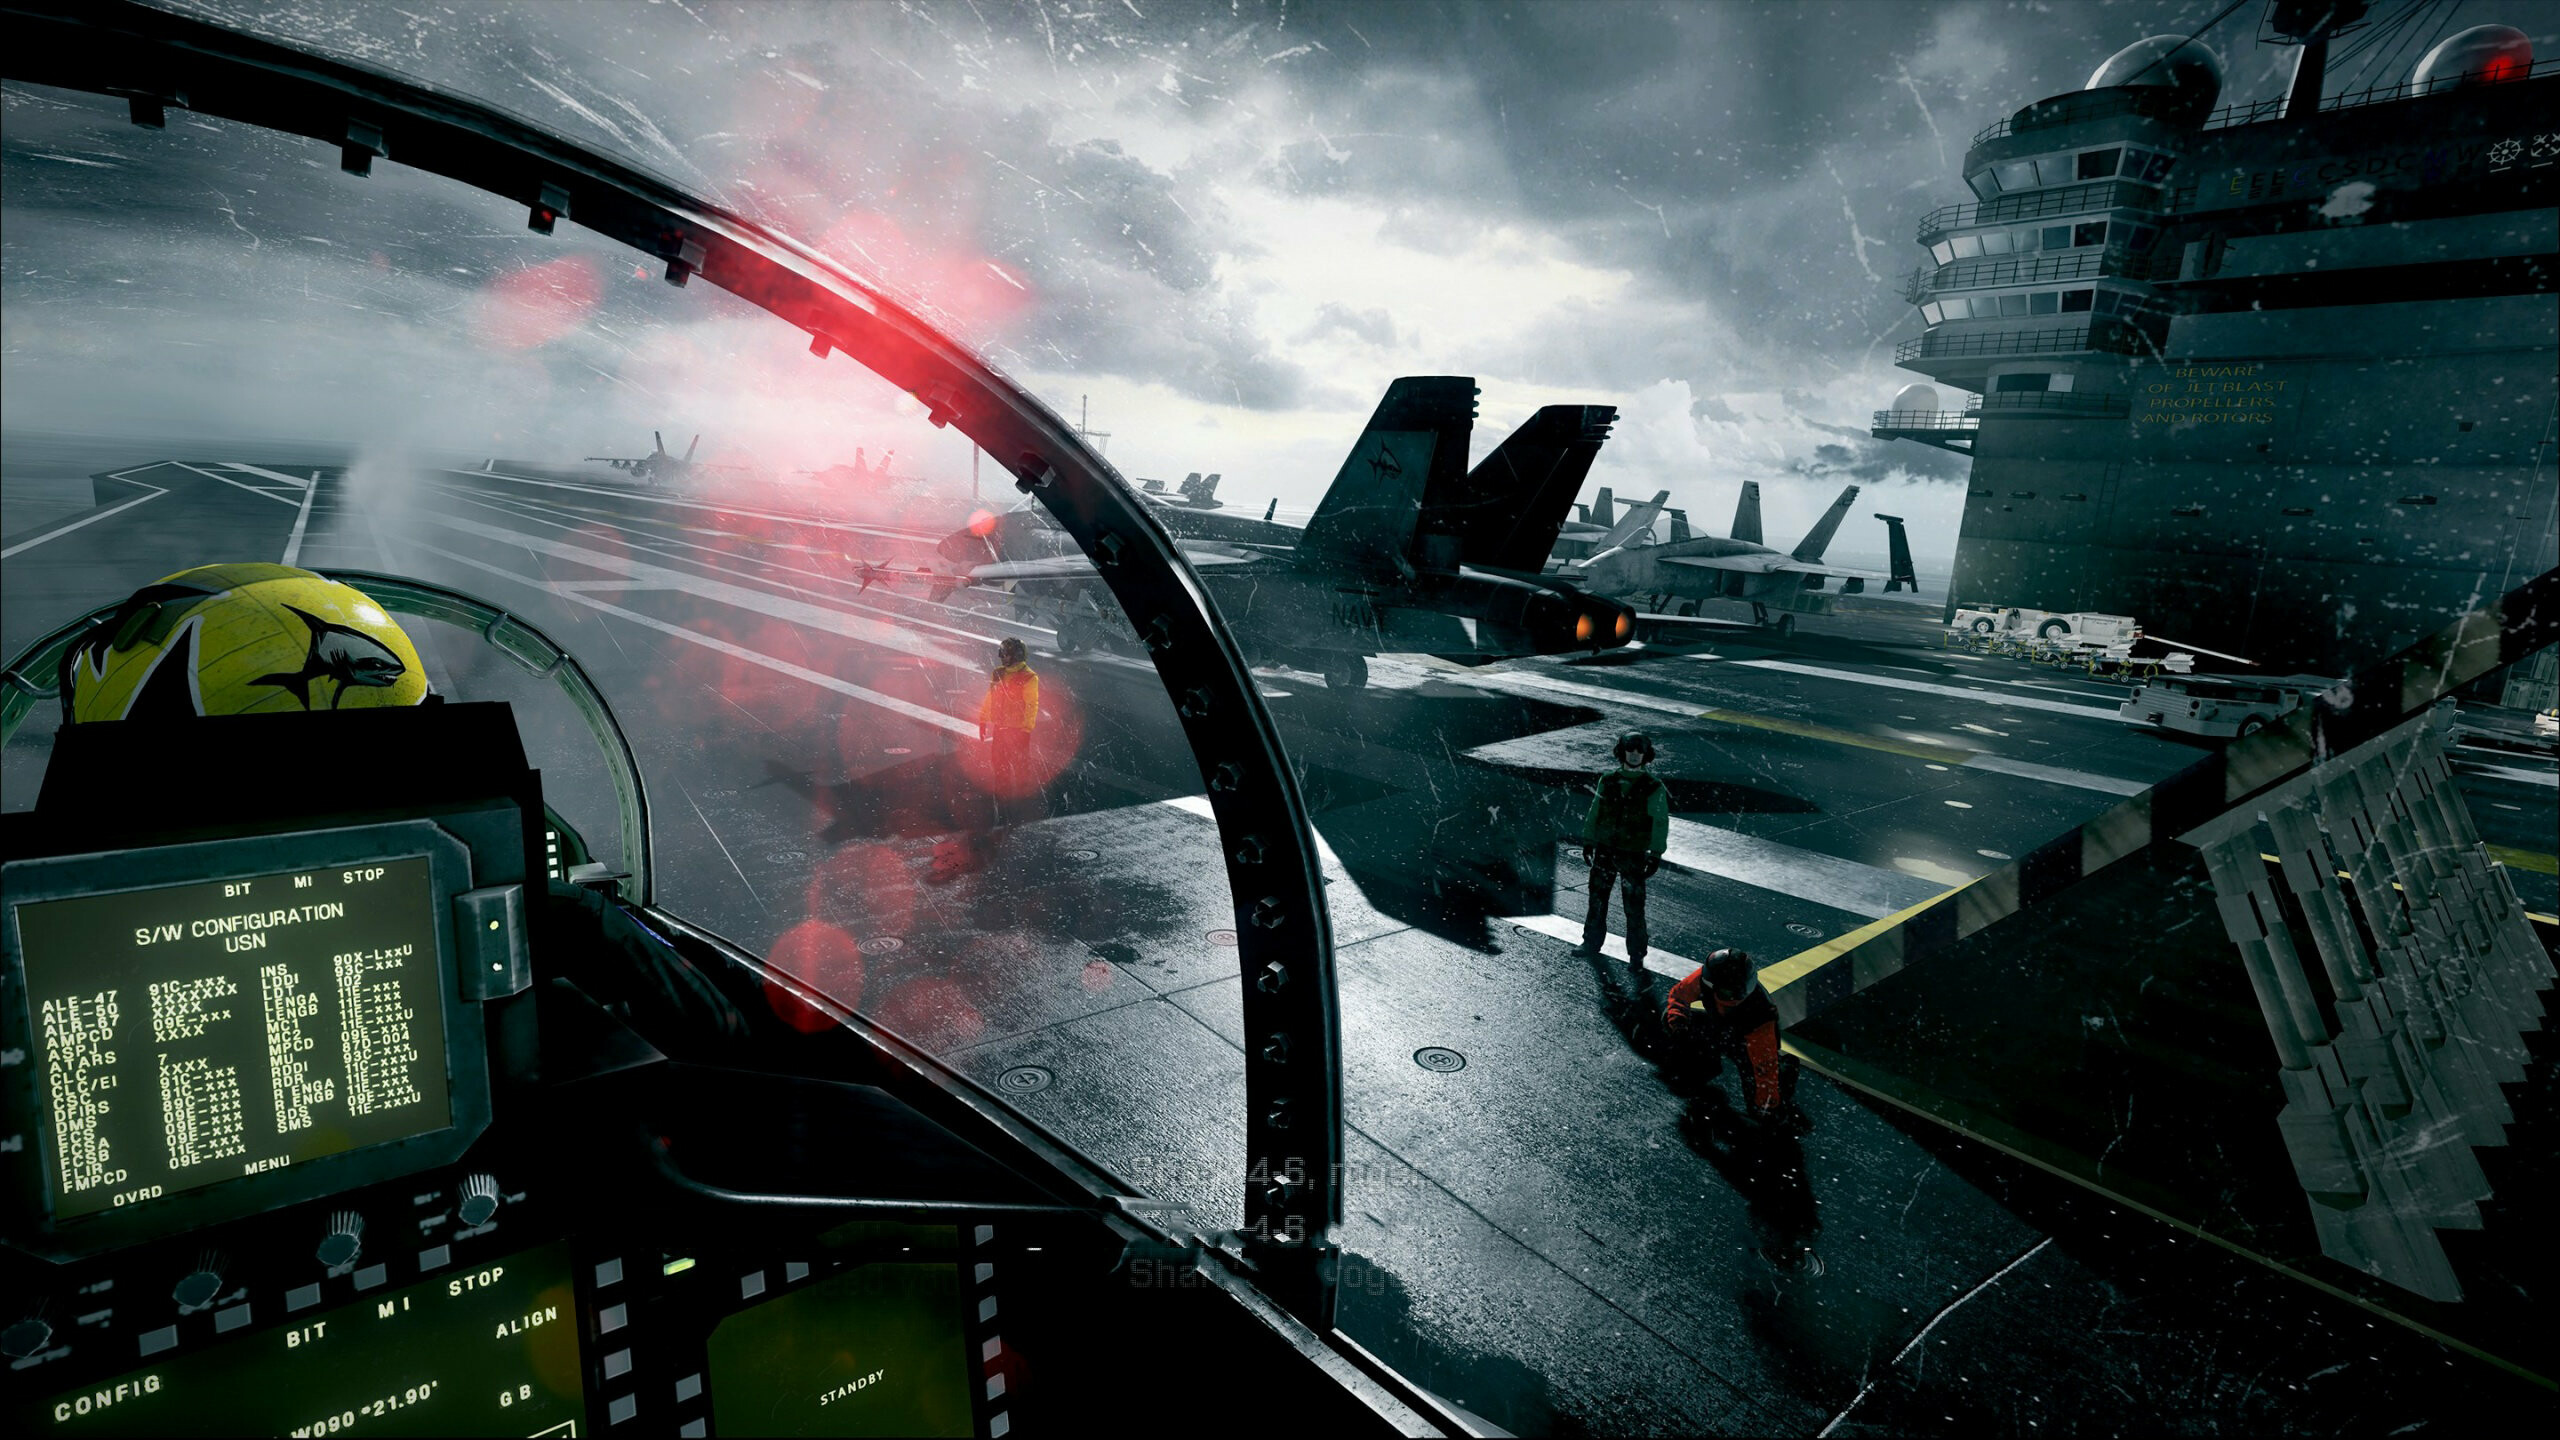 Battlefield 3: BF3, One of the shortest single-player campaigns in the FPS genre. 2560x1440 HD Wallpaper.